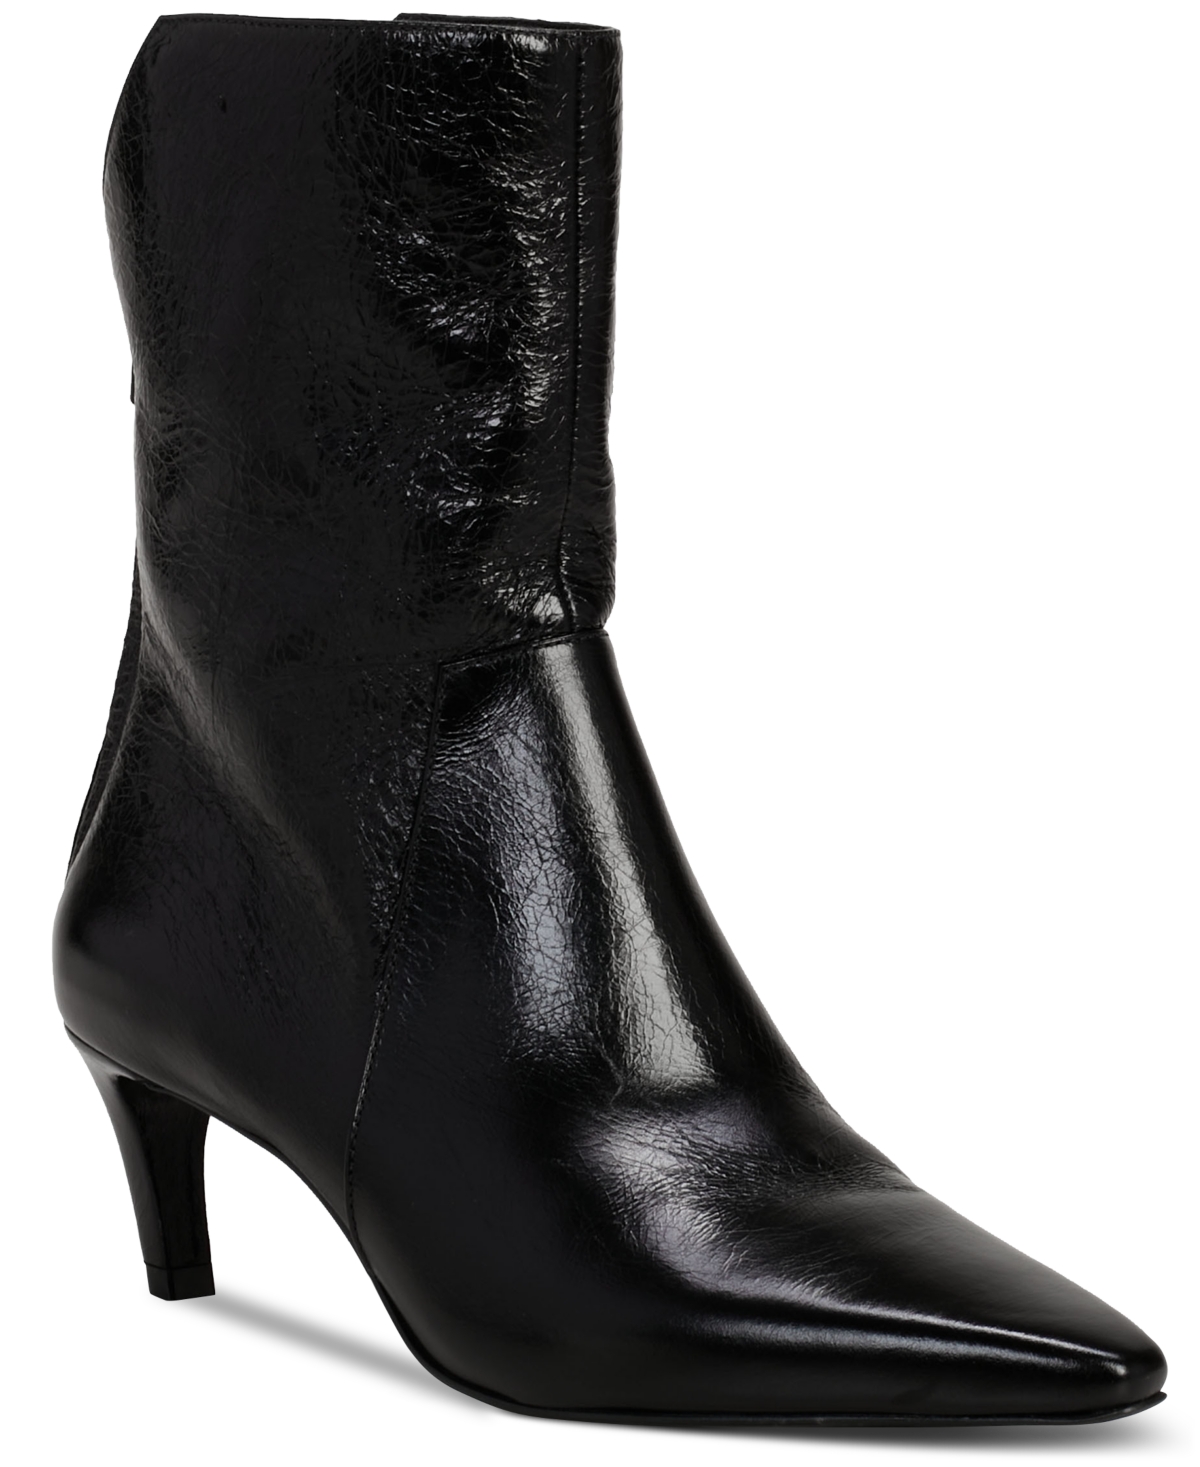 VINCE CAMUTO WOMEN'S QUINDELE POINTED-TOE DRESS BOOTIES